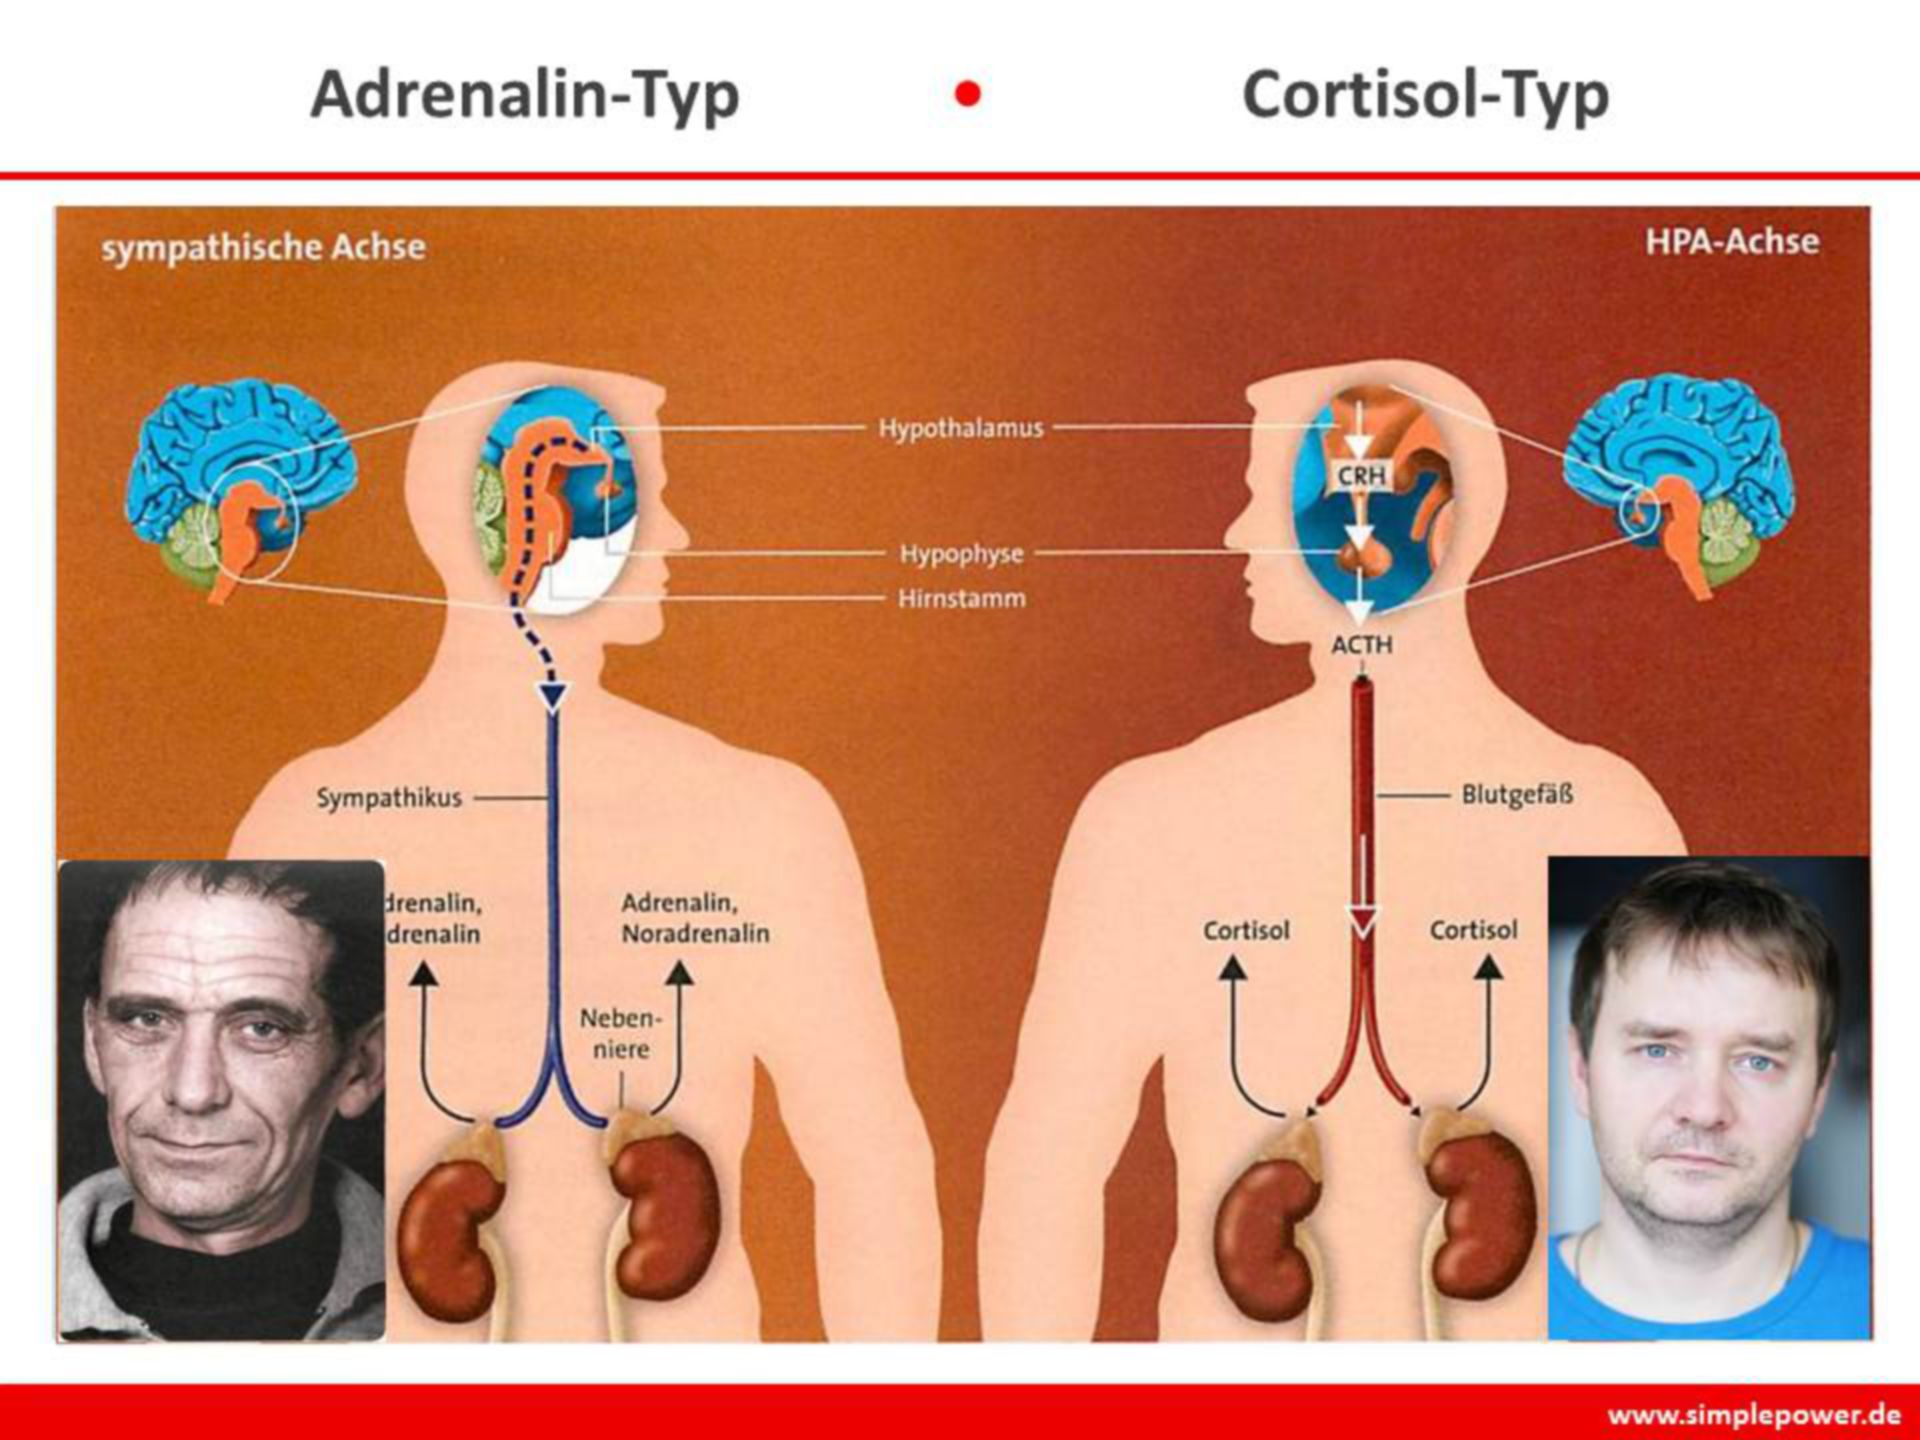 Neuro stress - adrenalin and cortisol types